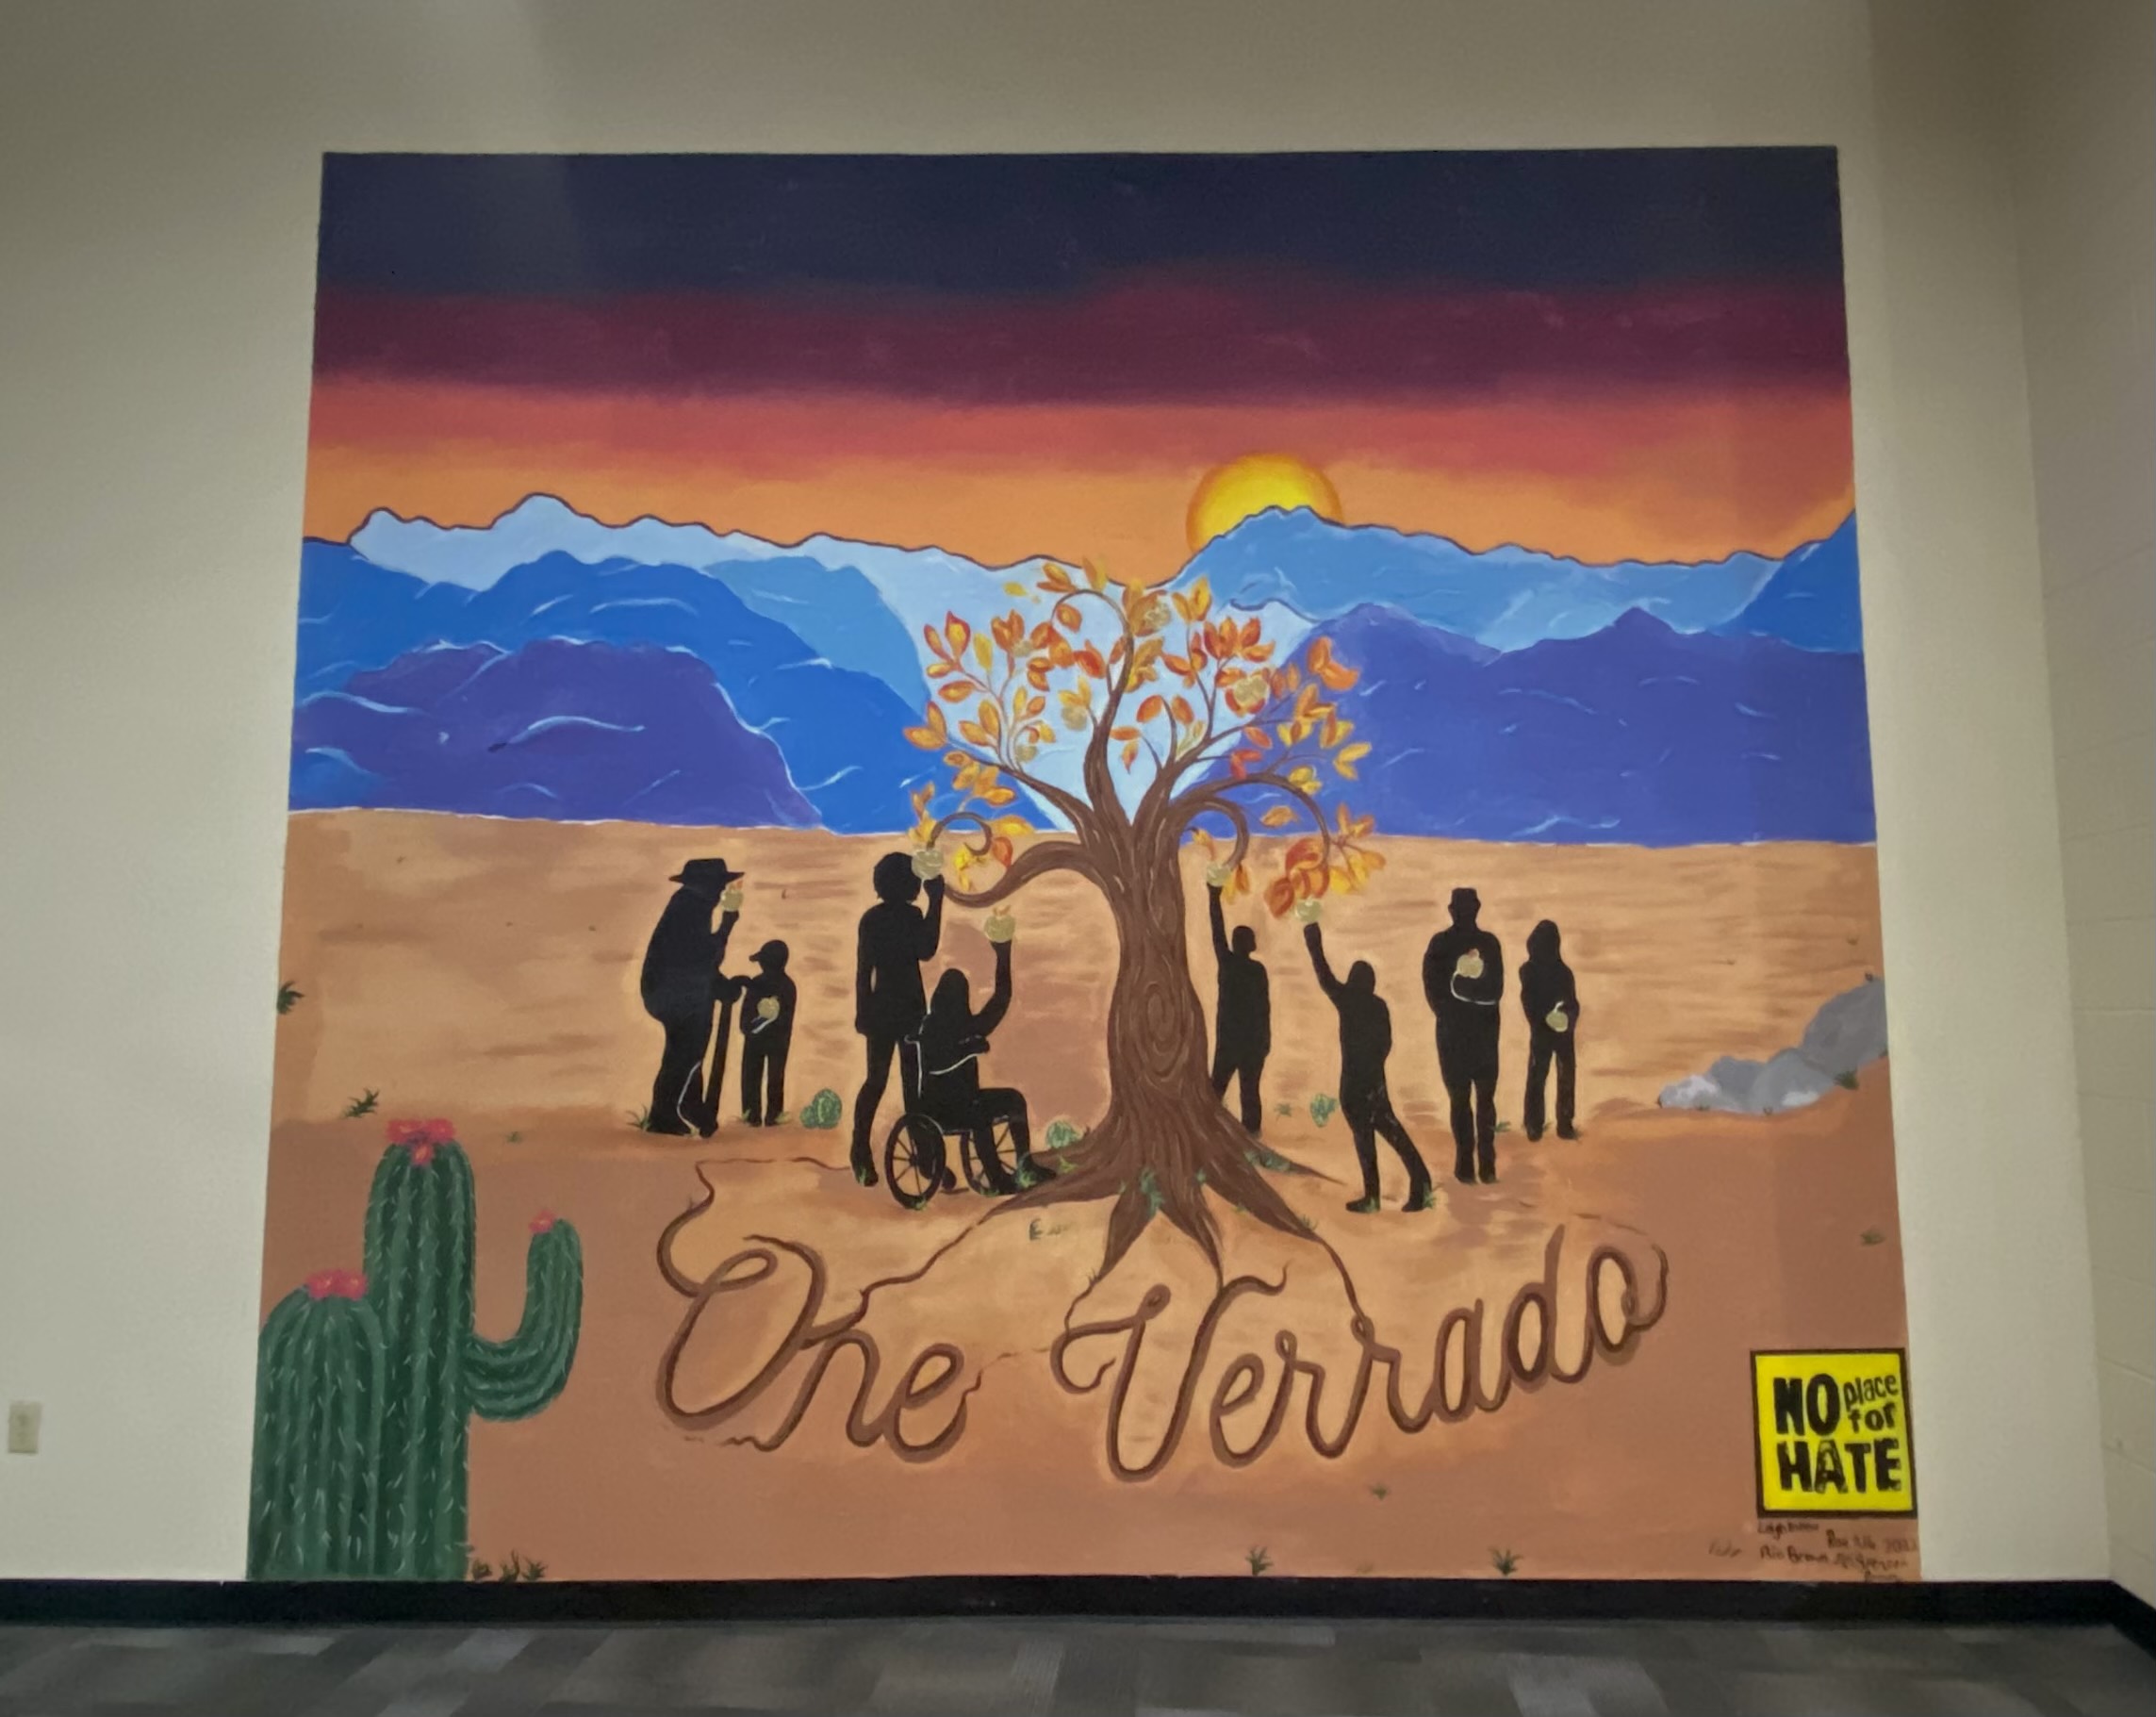 A mural painted just outside of E-wing was done by students.